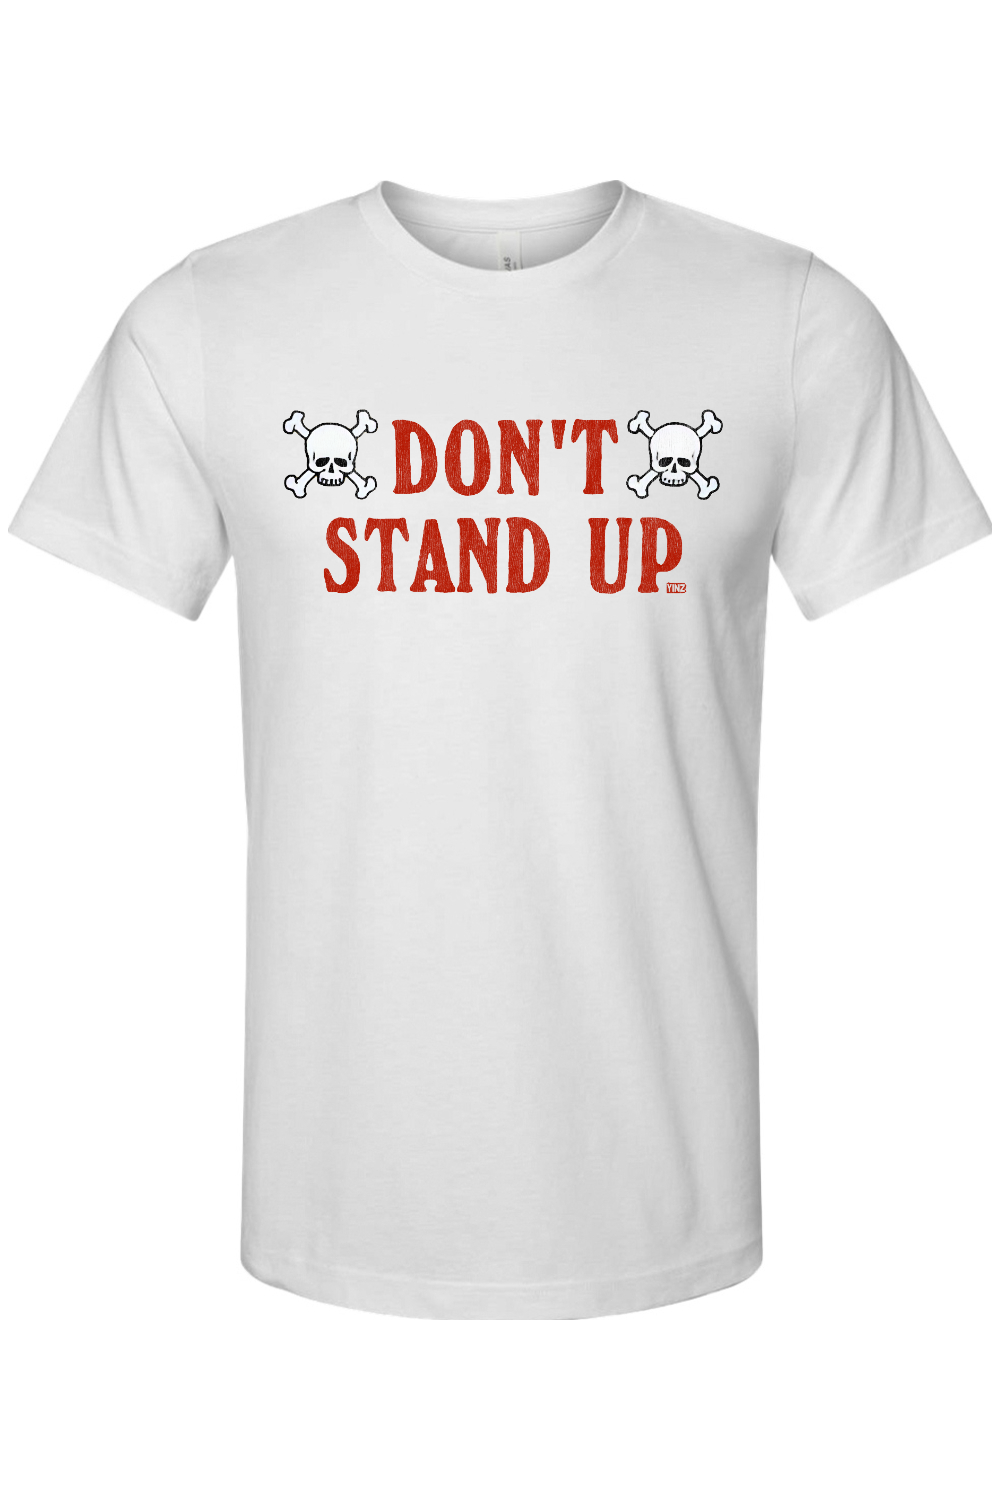 Don't Stand Up - Bella + Canvas Jersey Tee - Yinzylvania